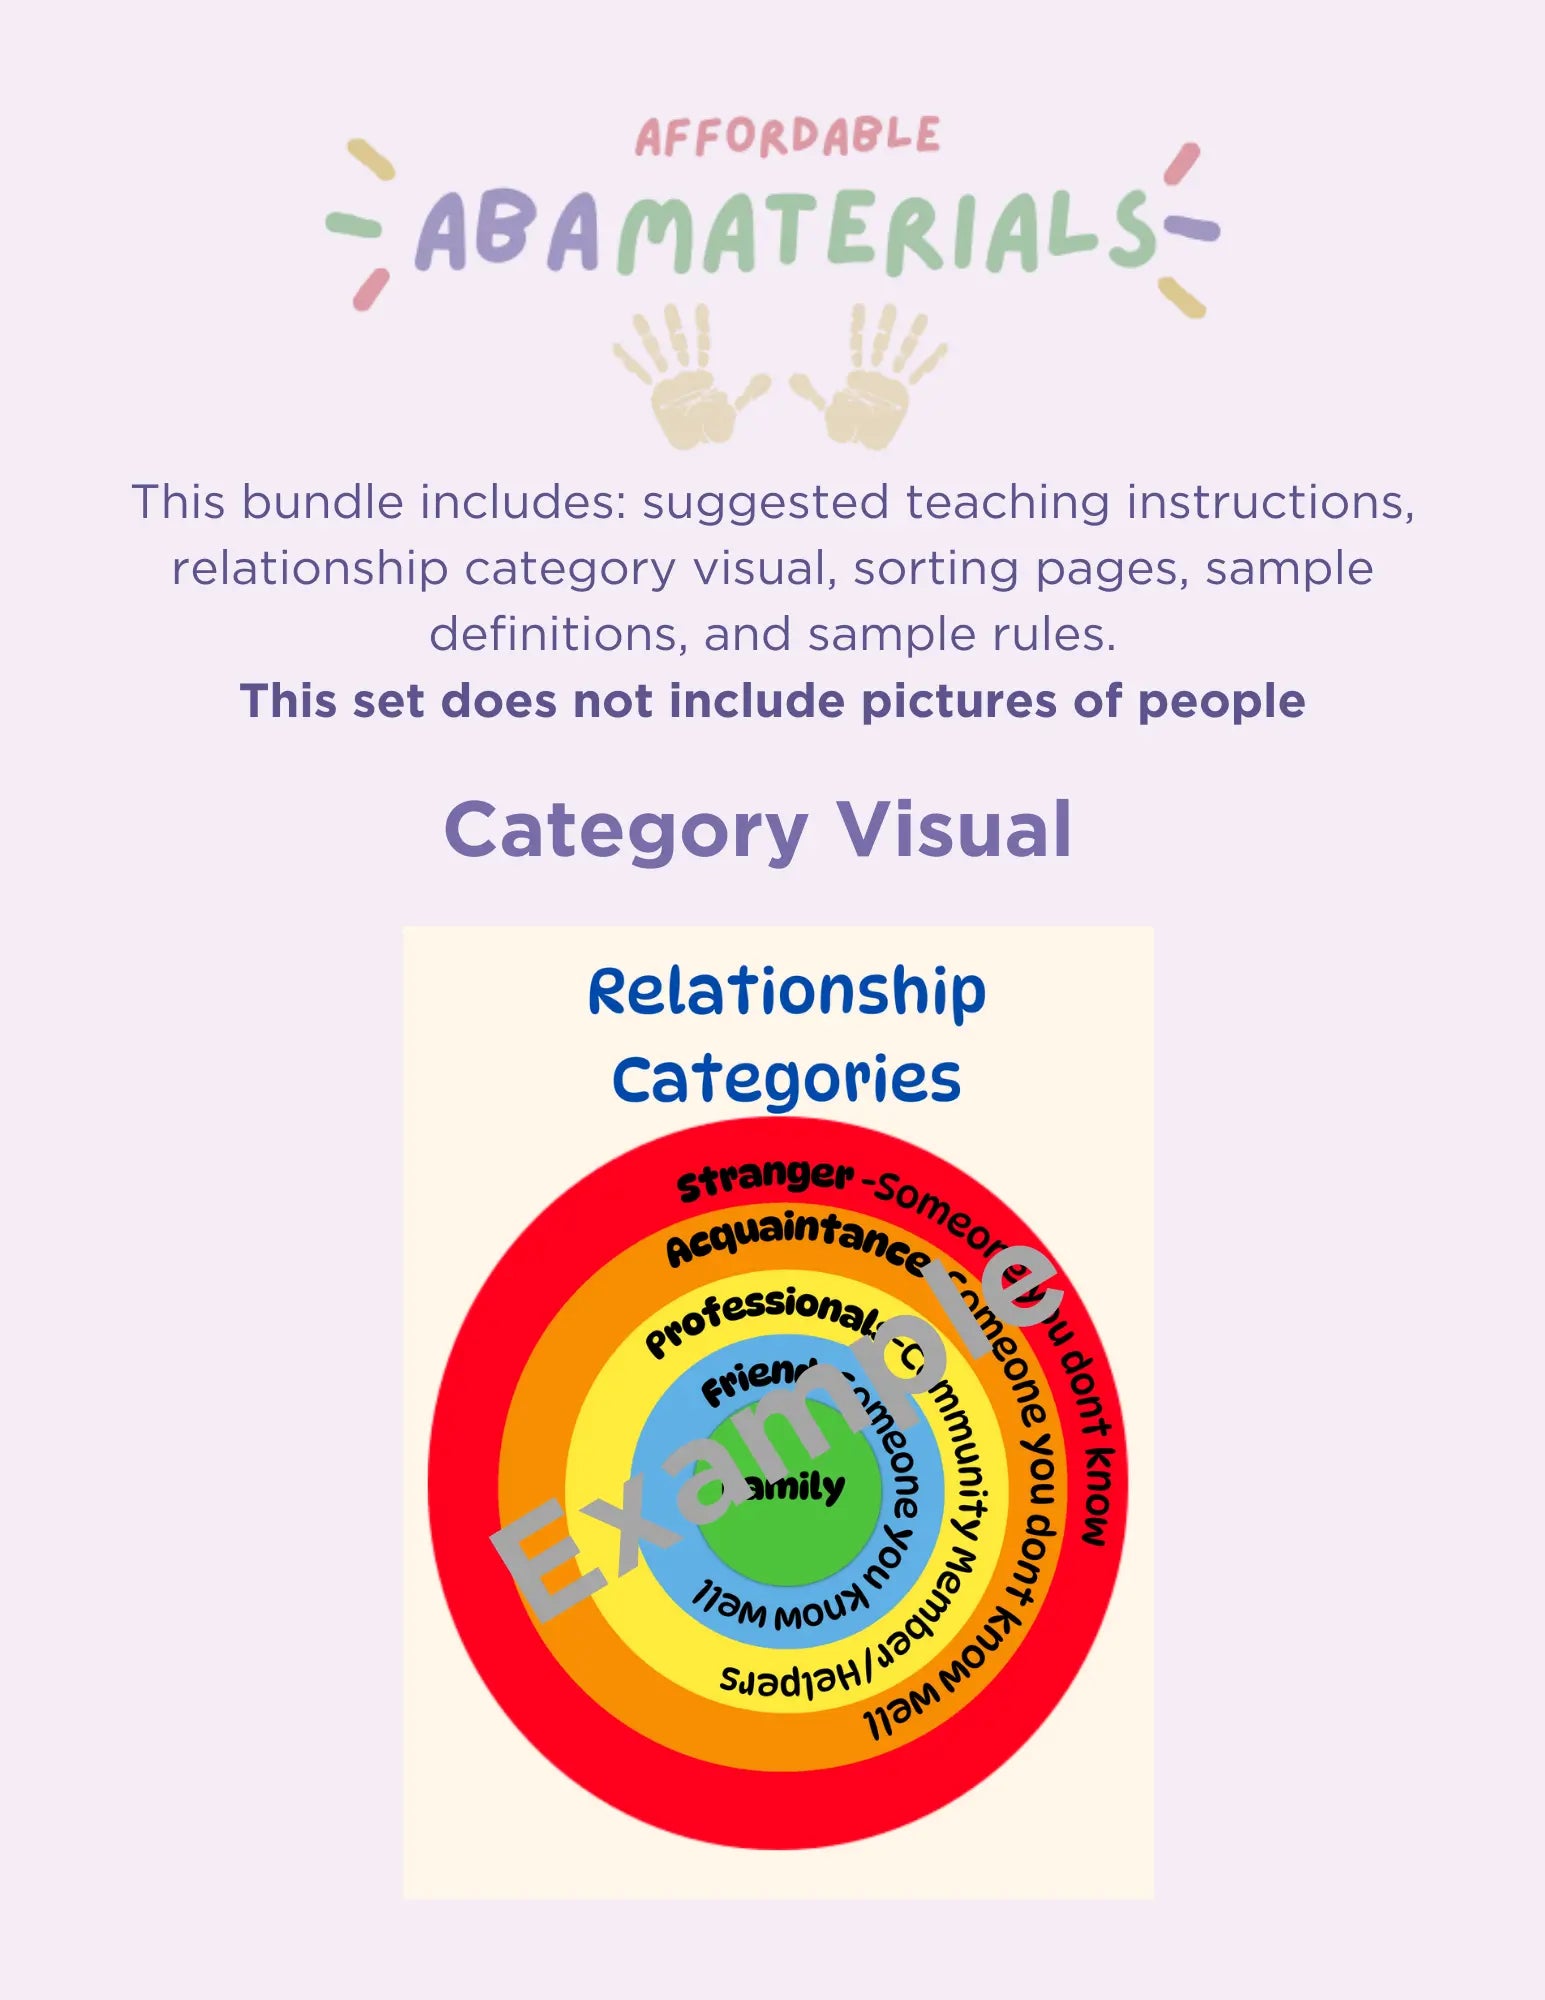 Relations of Others Printable Teaching Resource-Understanding Relationships of People in Your World Learning Pack Learn Categories of People from Family to Strangers Affordable ABA Materials